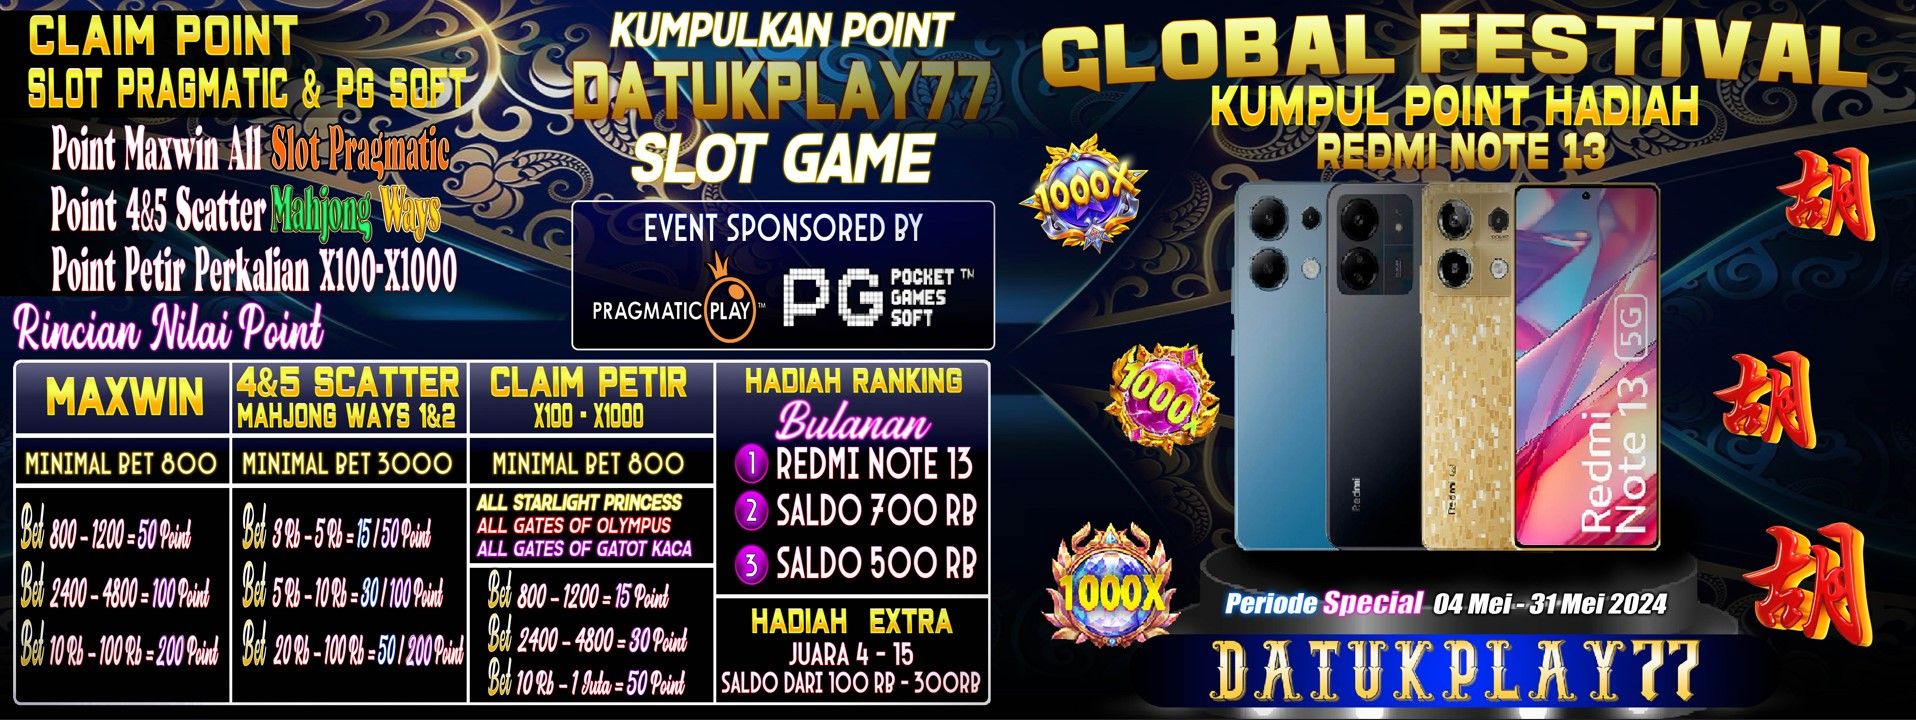 SPECIAL EVENT CLAIM POINT DATUKPLAY77